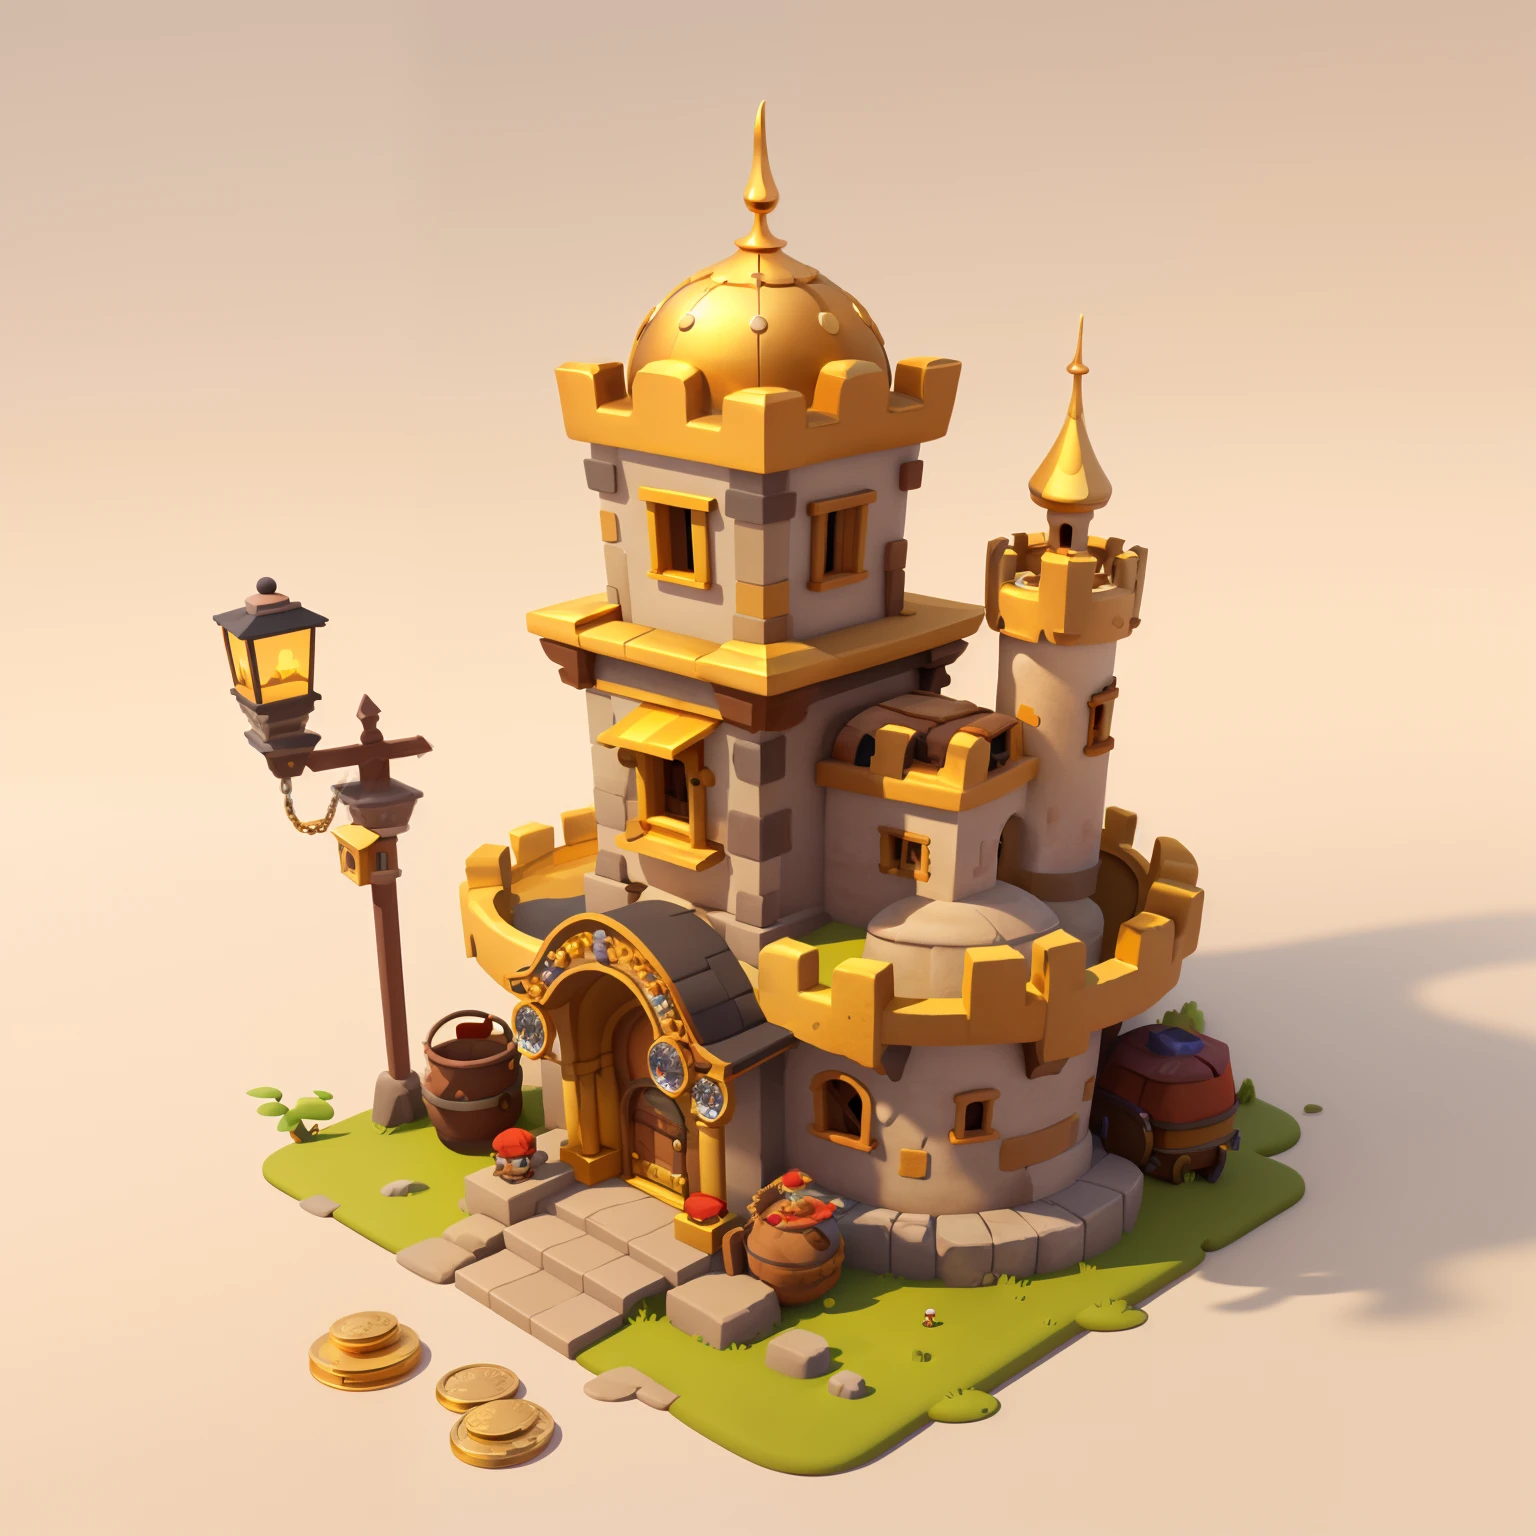 tmasterpiece，Best quality at best，Cartoony，pixar-style，Simple design，mini sence，Artiinaret Castle，gold coins，Treasure chests，Top of the Red Tower，